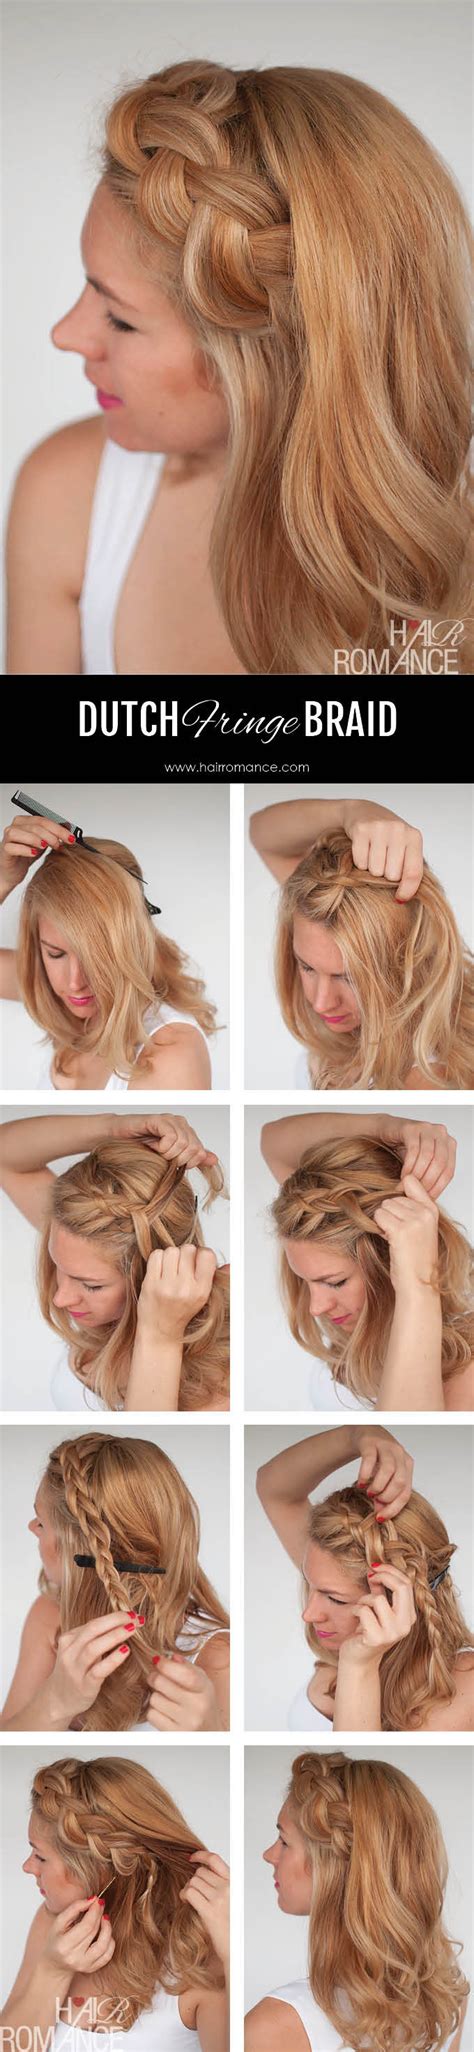 Dutch Braid Tutorial For When Your Fringe Is A Mess Hair Romance